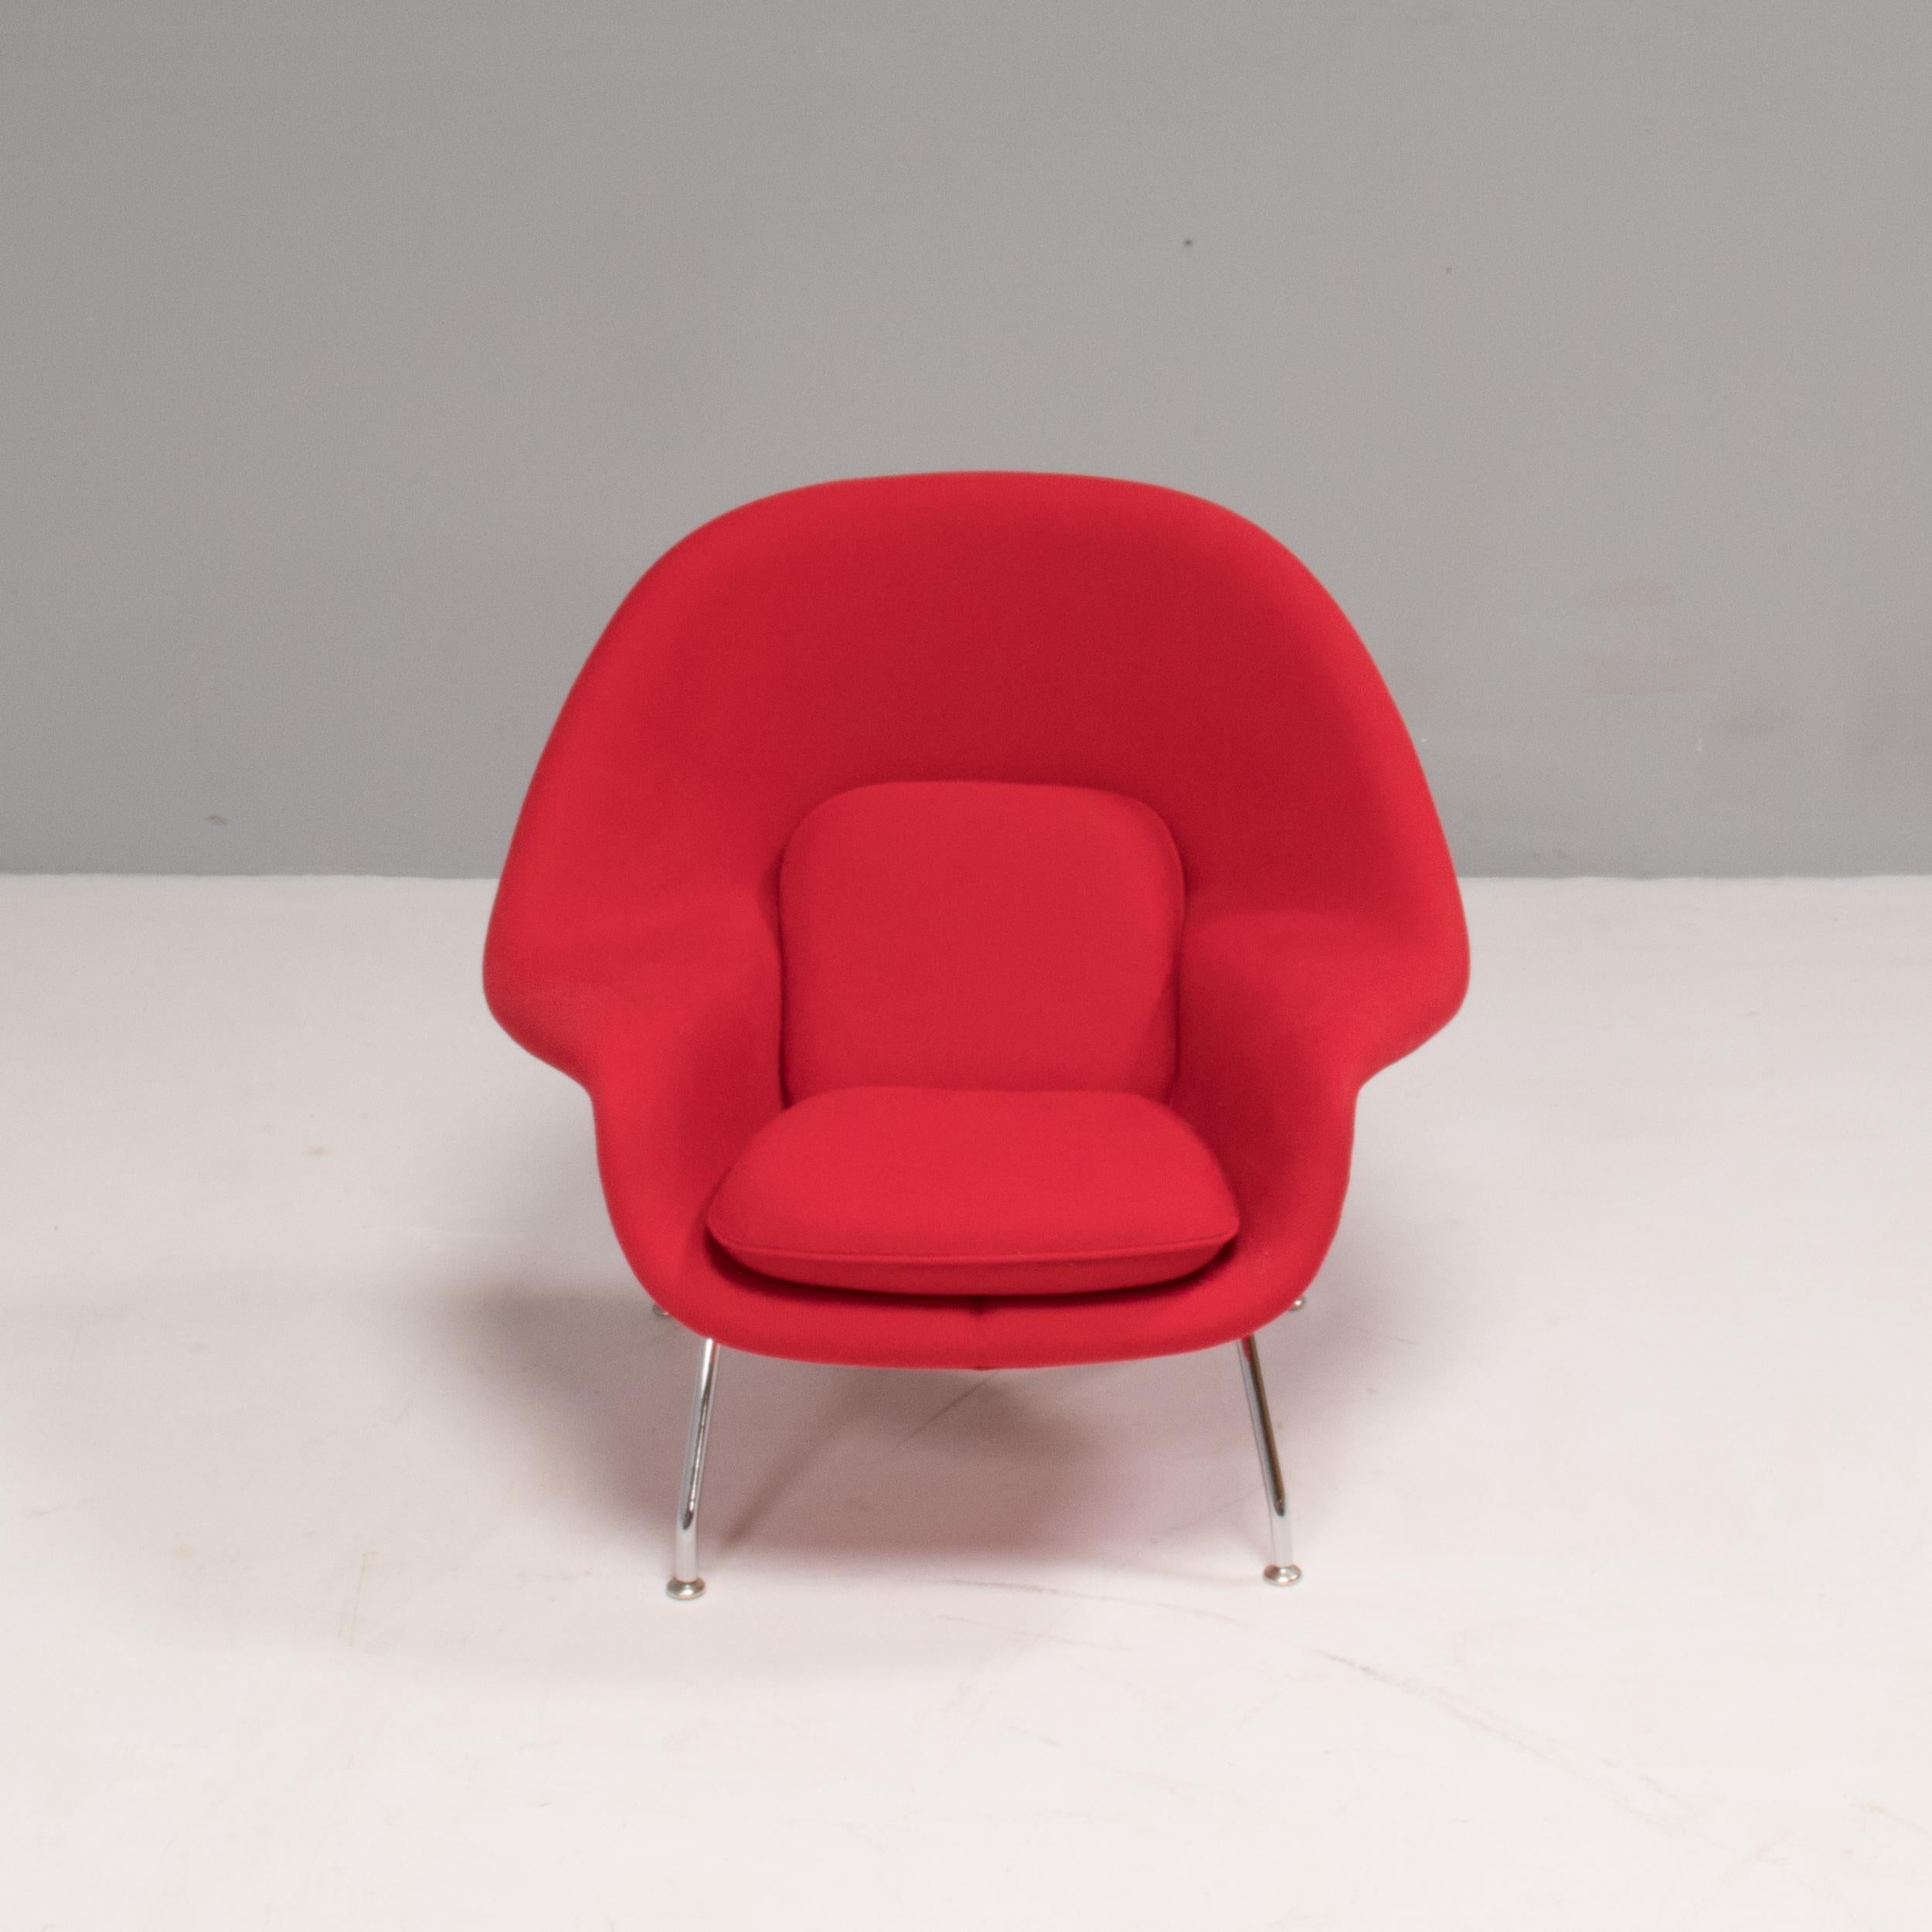 This iconic chair was designed by prolific designer Eero Saarinen in 1948. 
Eero Saarinen designed the groundbreaking womb chair at Florence Knoll's request for “a chair that was like a basket full of pillows - something she could really curl up